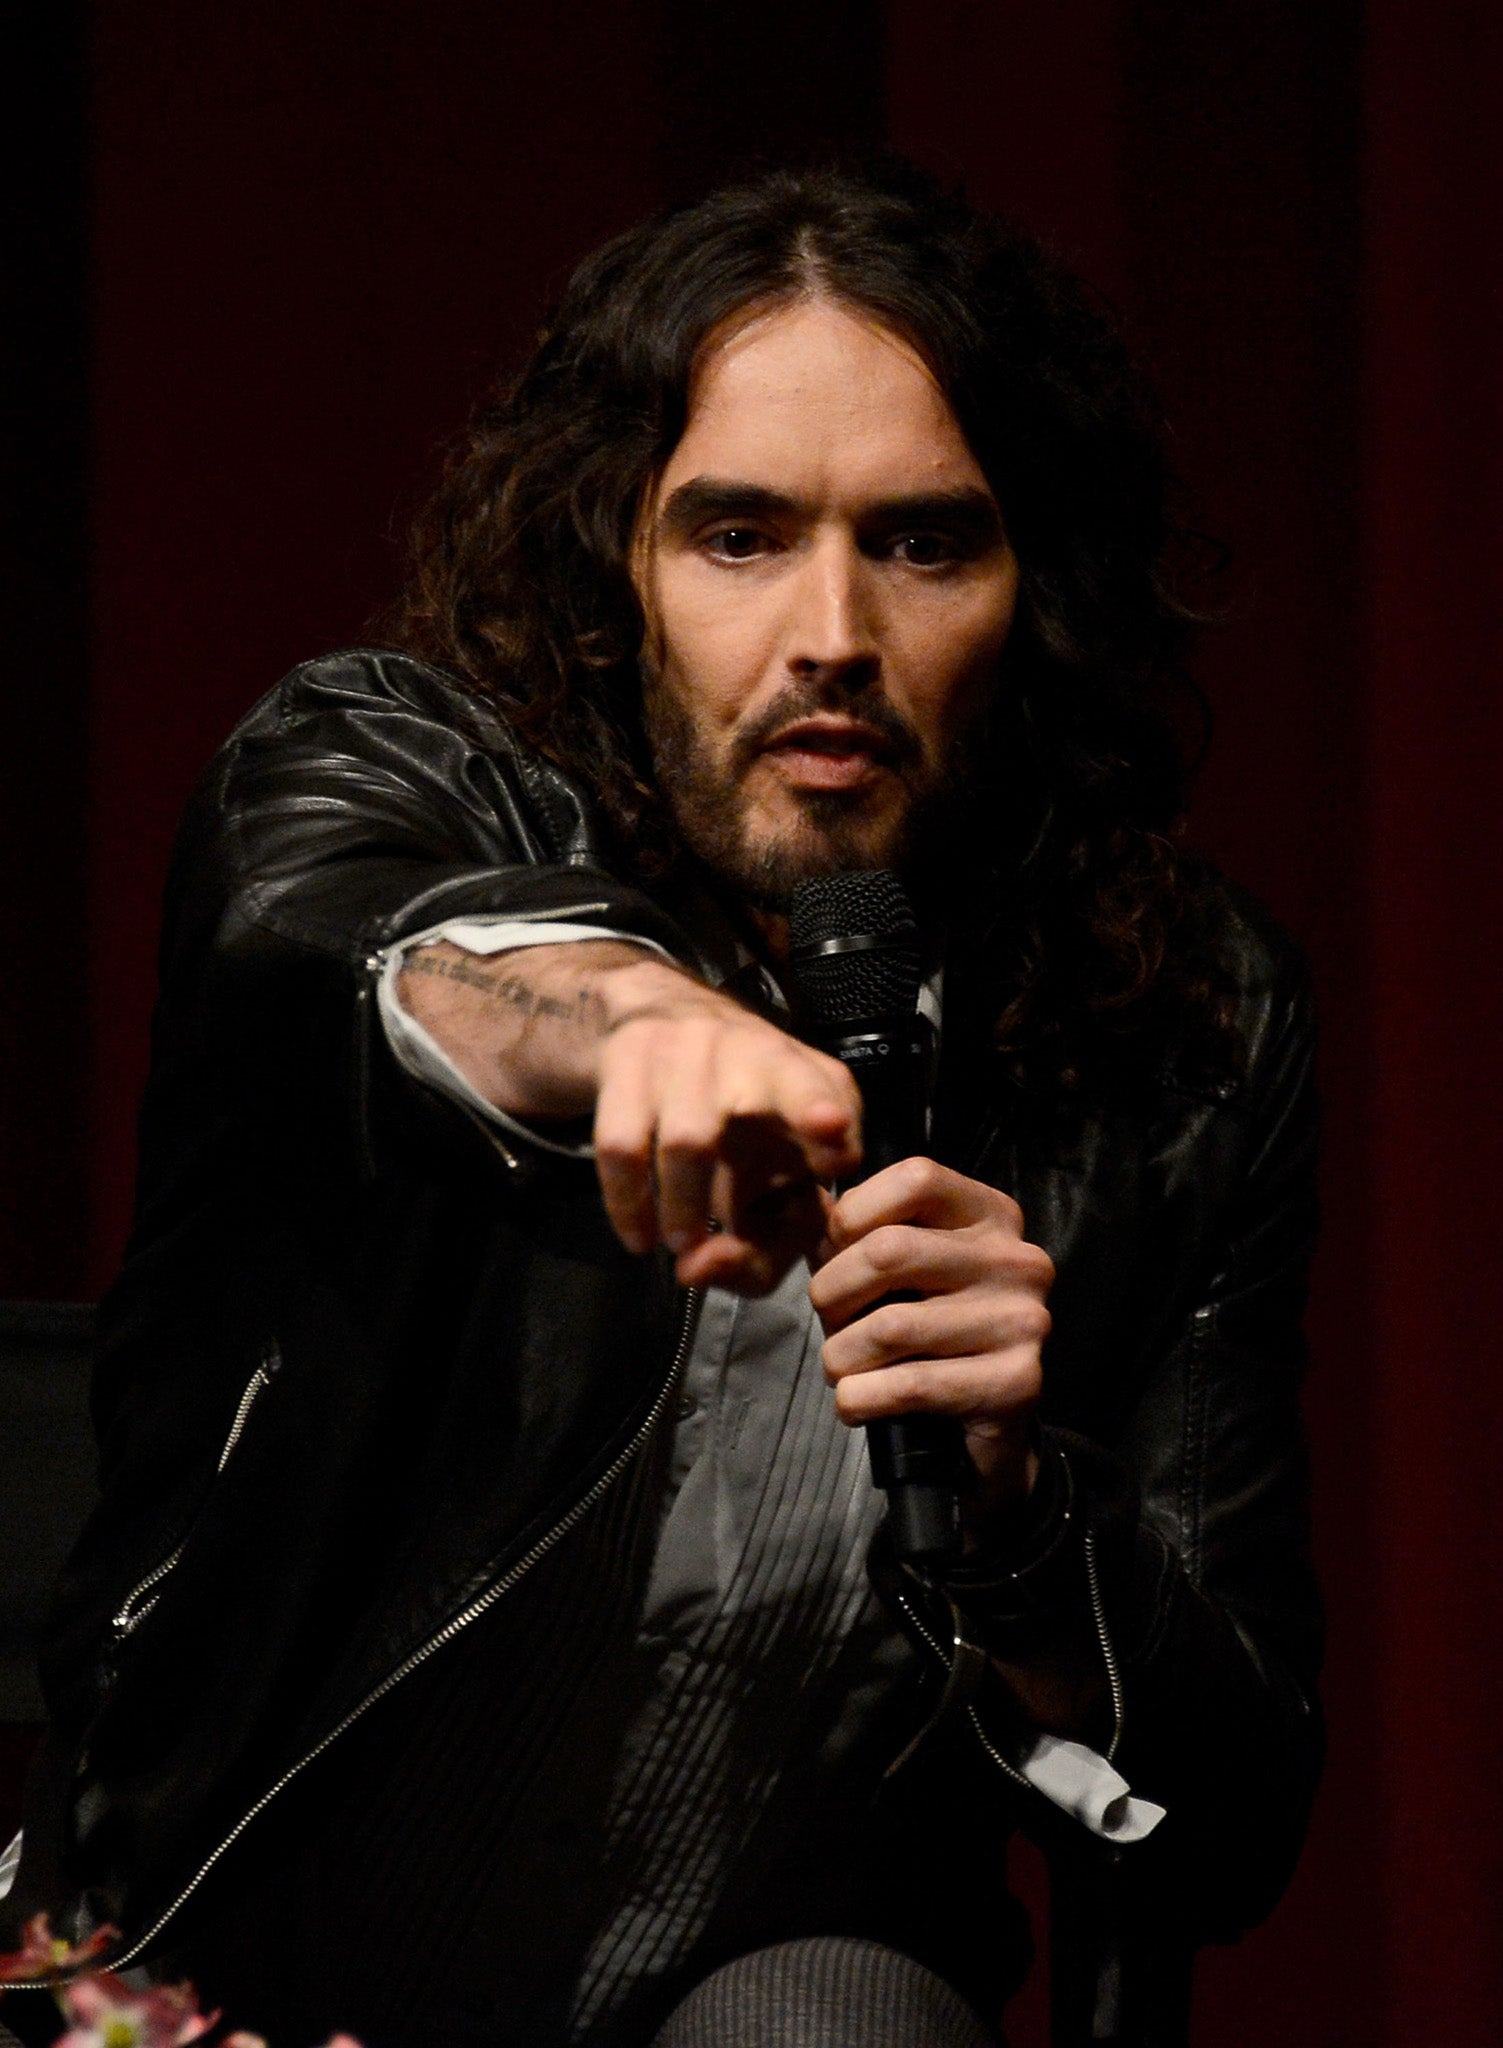 Russell Brand will appear alongside Boris Johnson on Question Time.